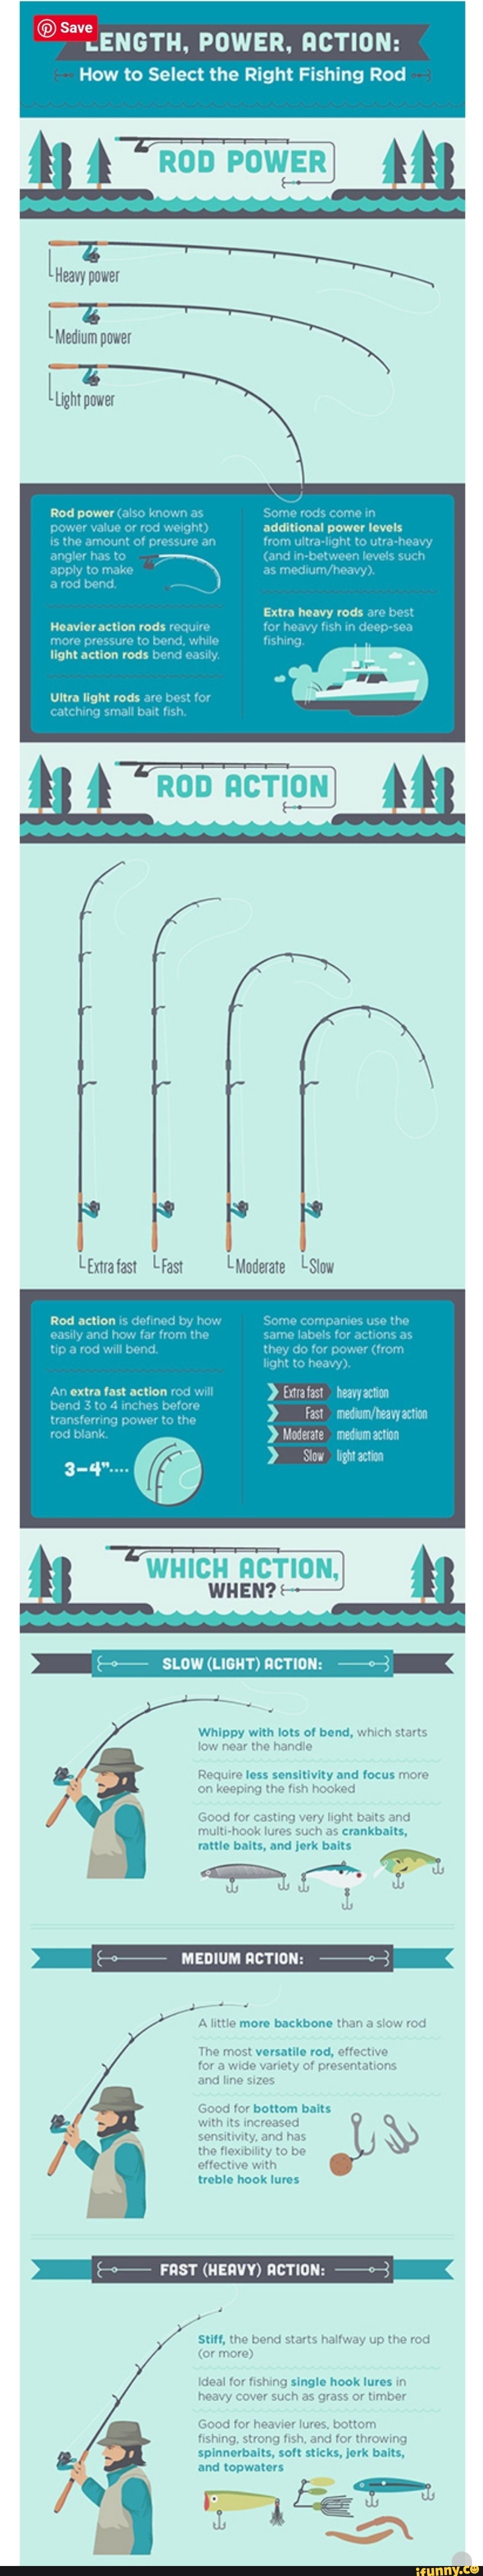 Use Length, Power and Action to Choose the Right Fishing Rod